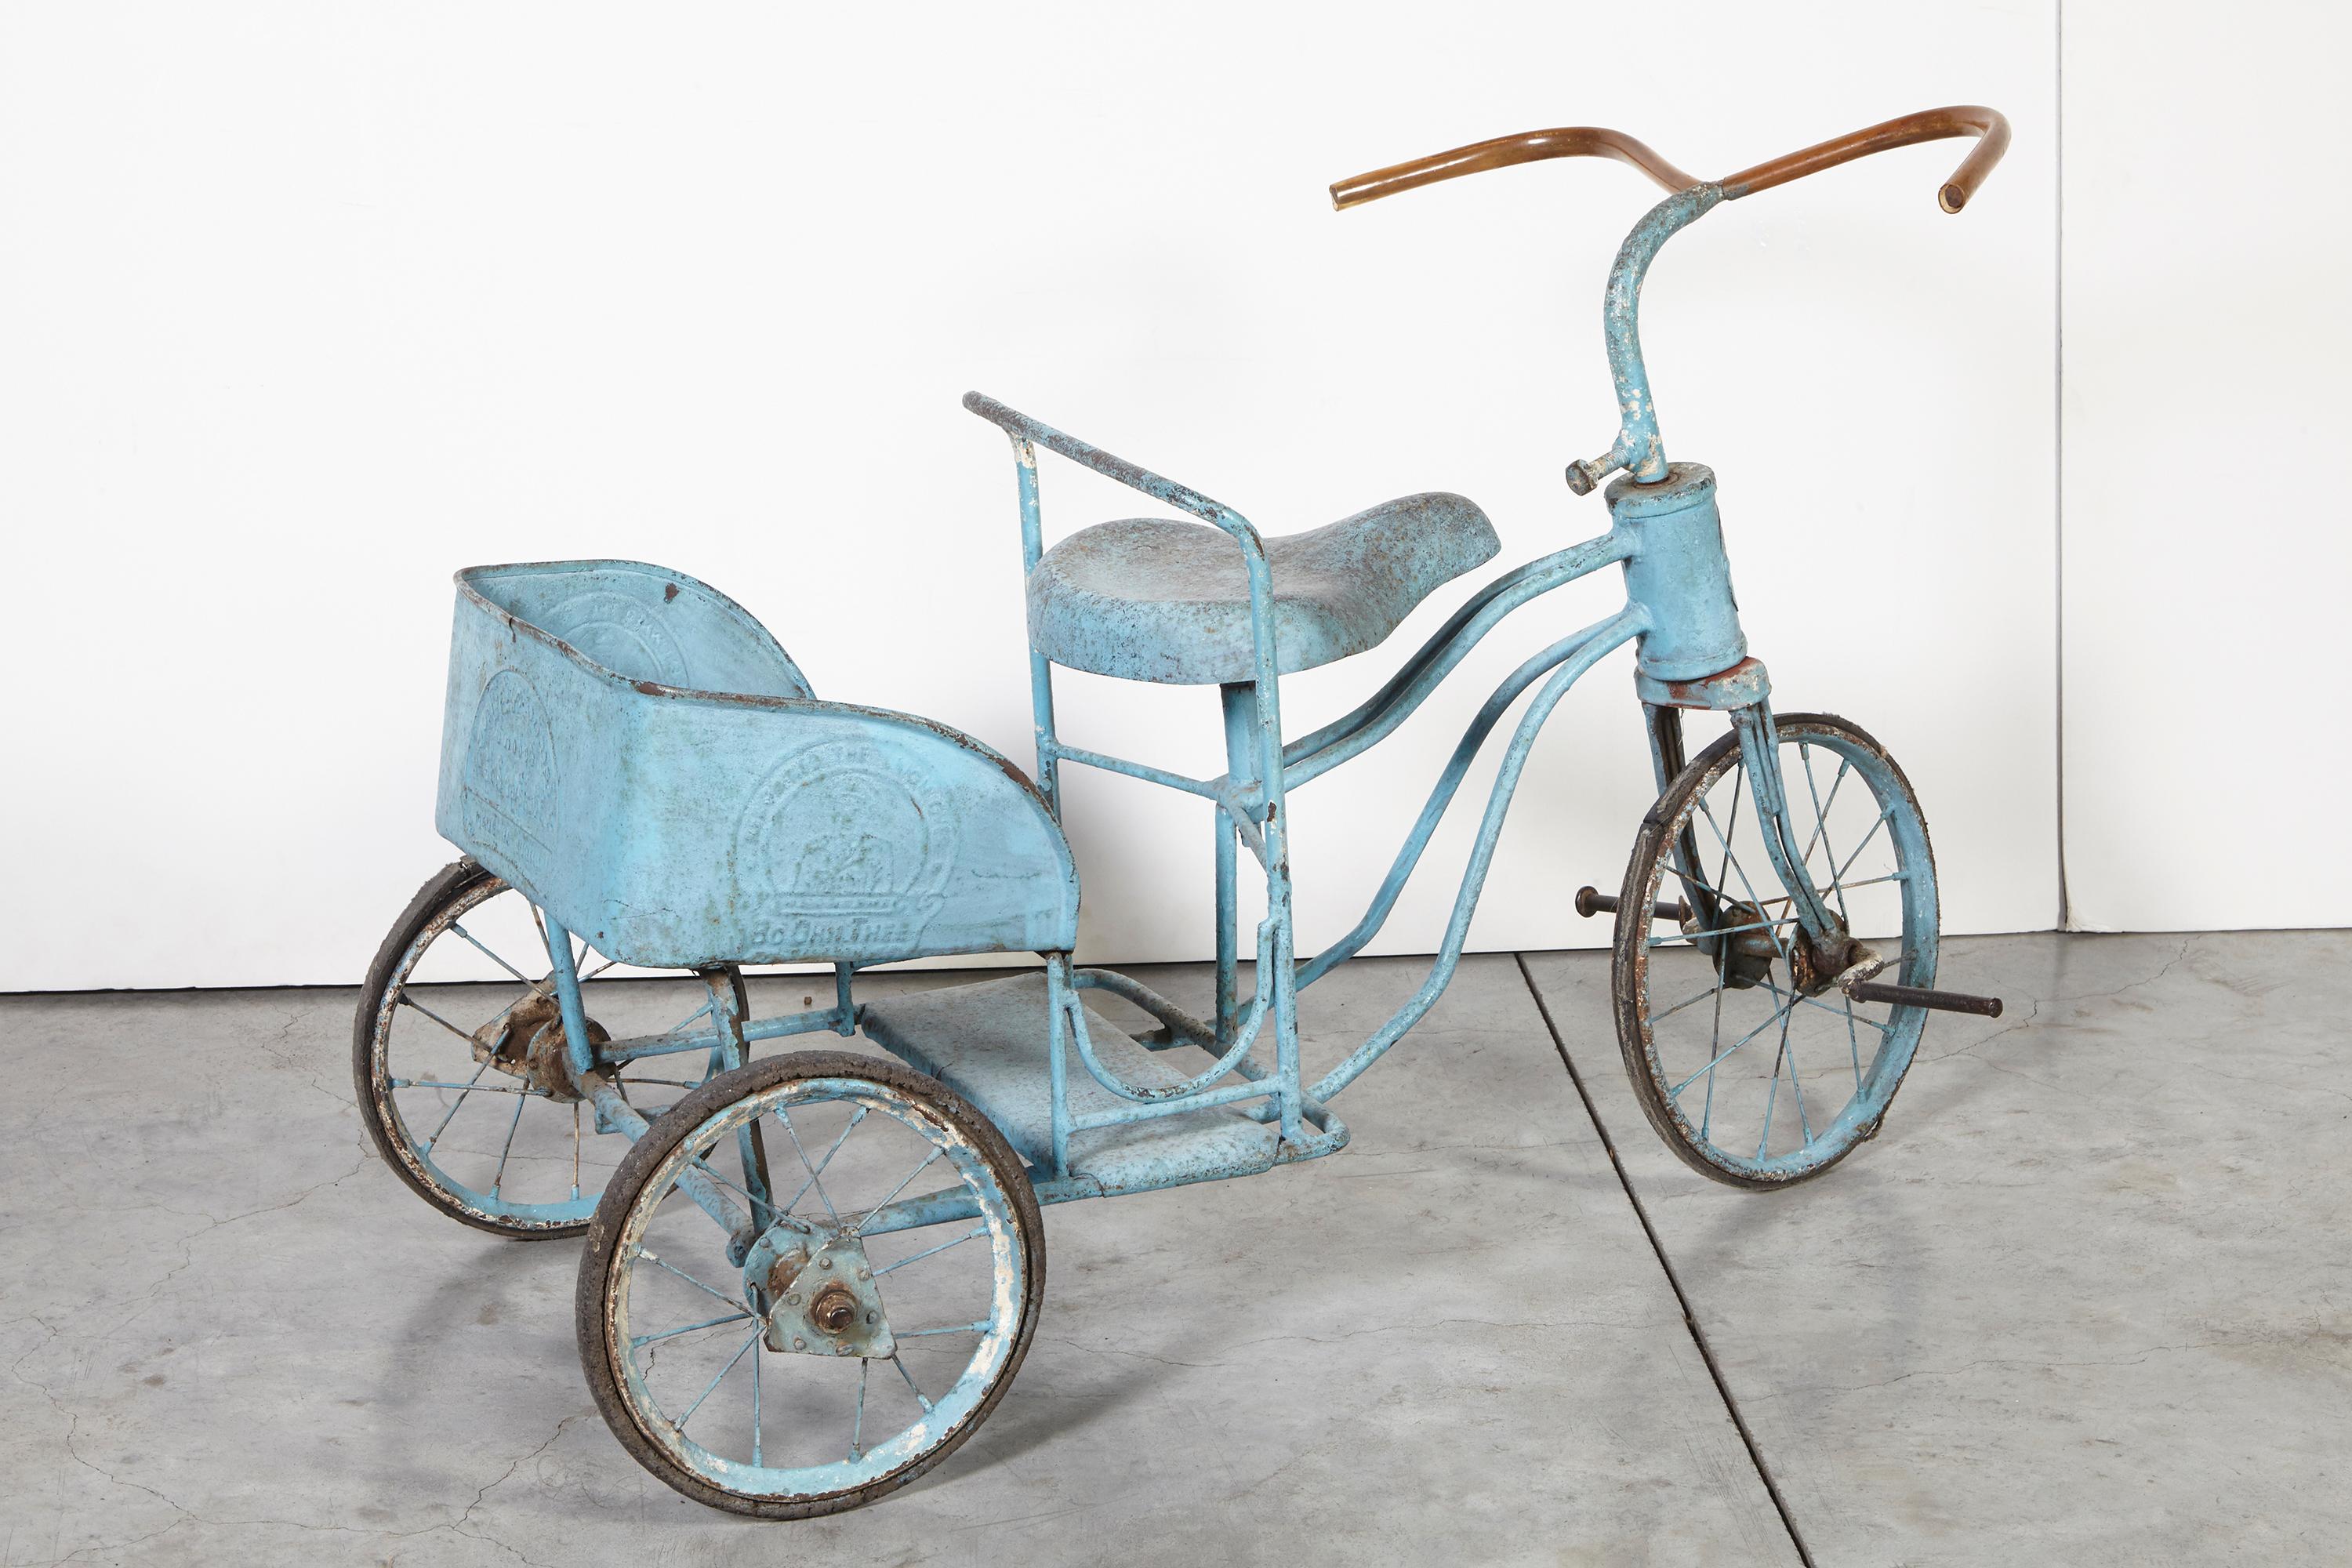 An adorable antique Burmese child's tricycle with parcel carrier and original blue paint. The embossed Burmese characters on the back and side of the carrier add authenticity and interest. An unusual and beautiful object.